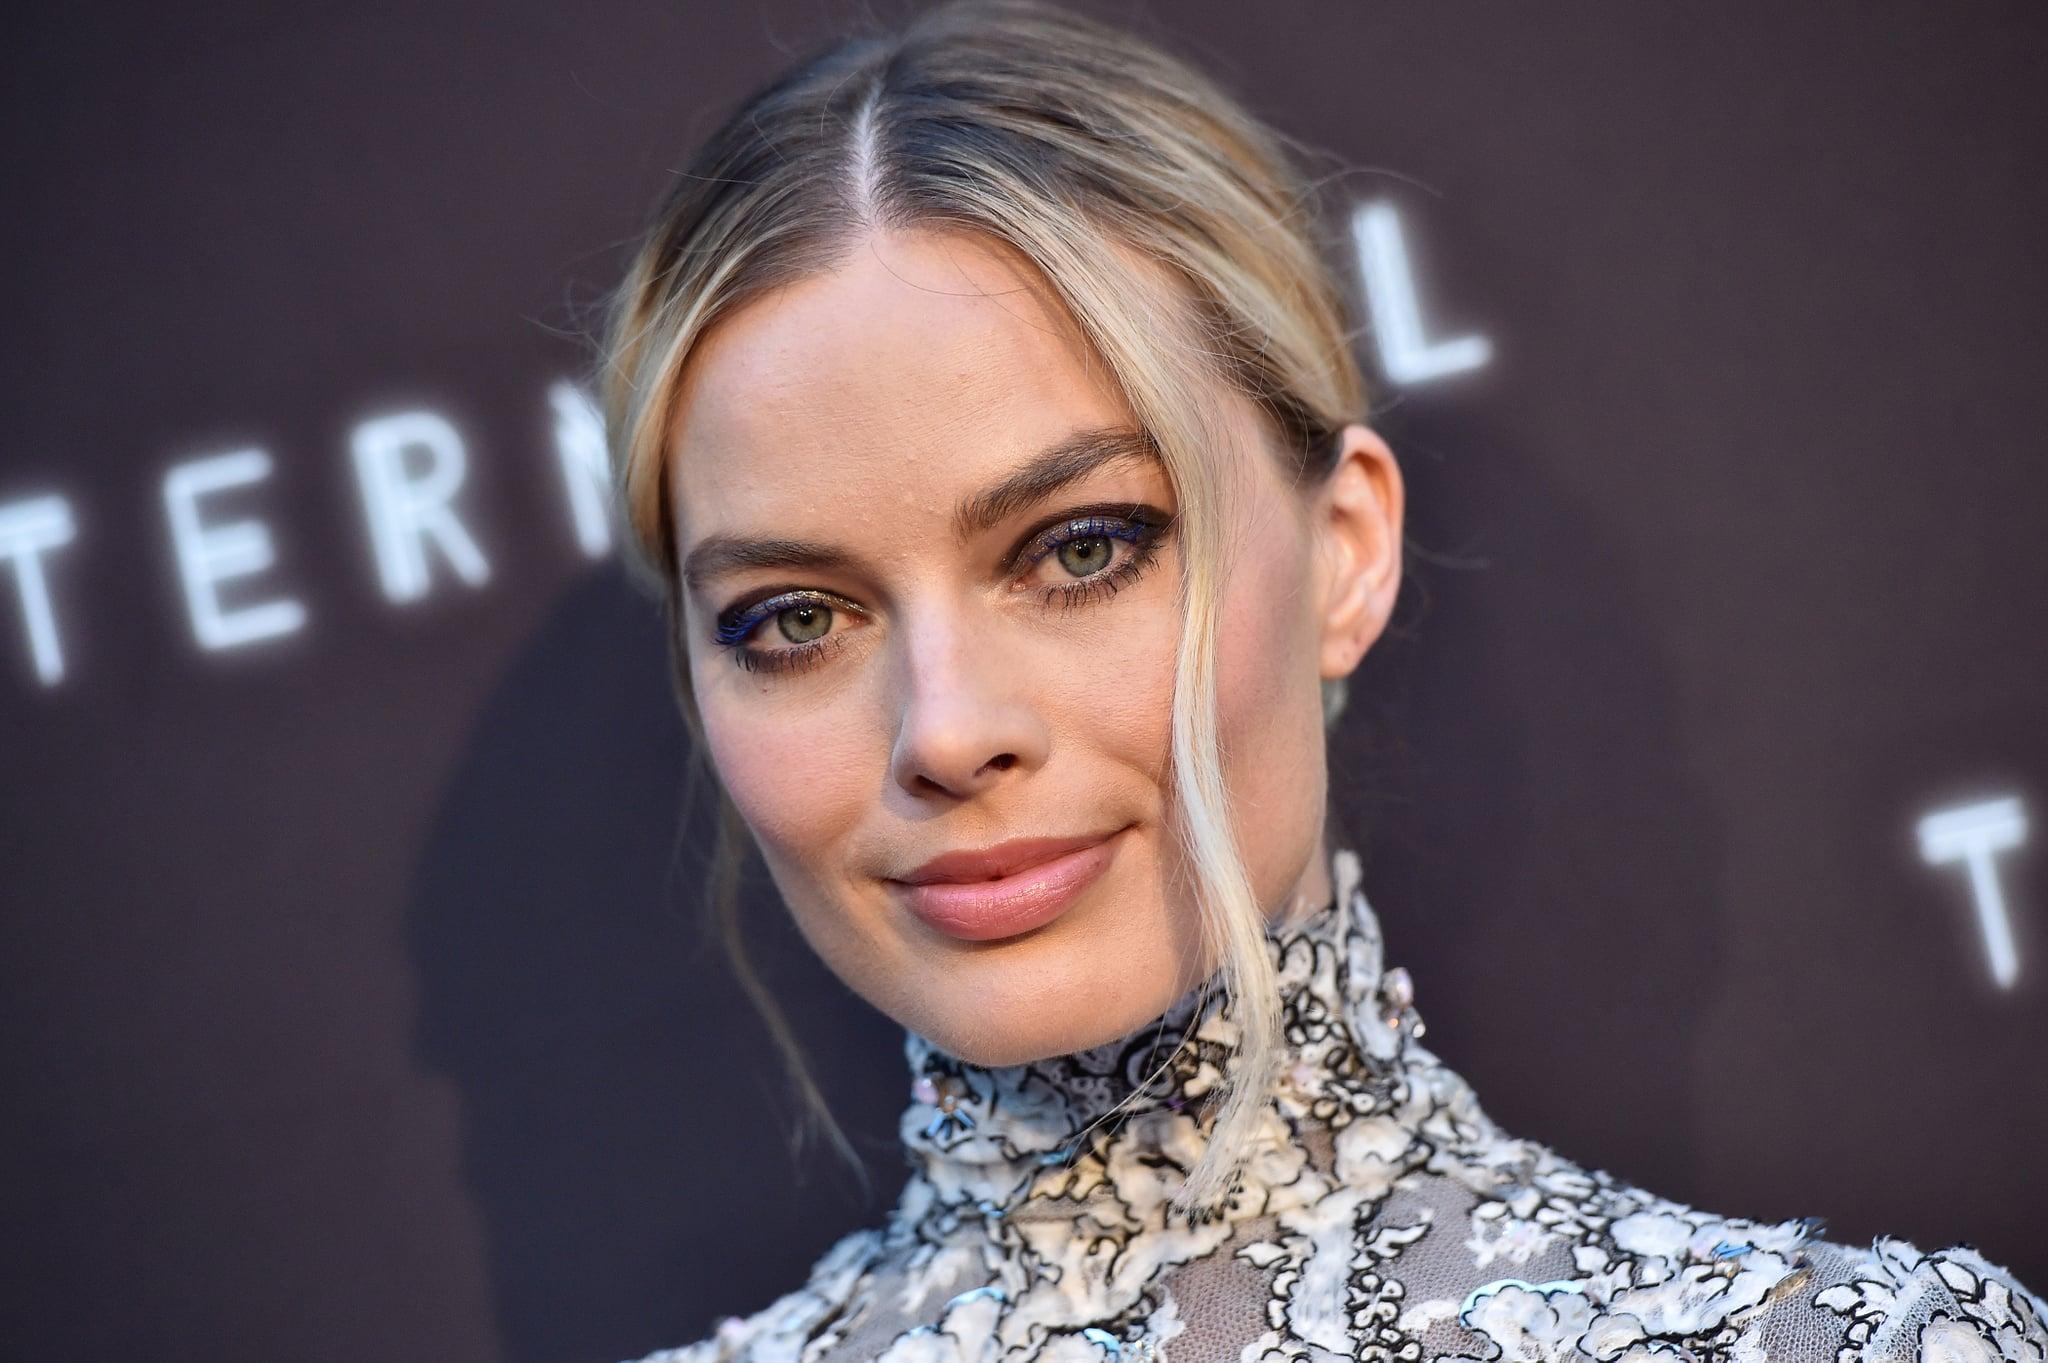 Margot Robbie's Quotes About Pressure to Have Kids Jan. 2019